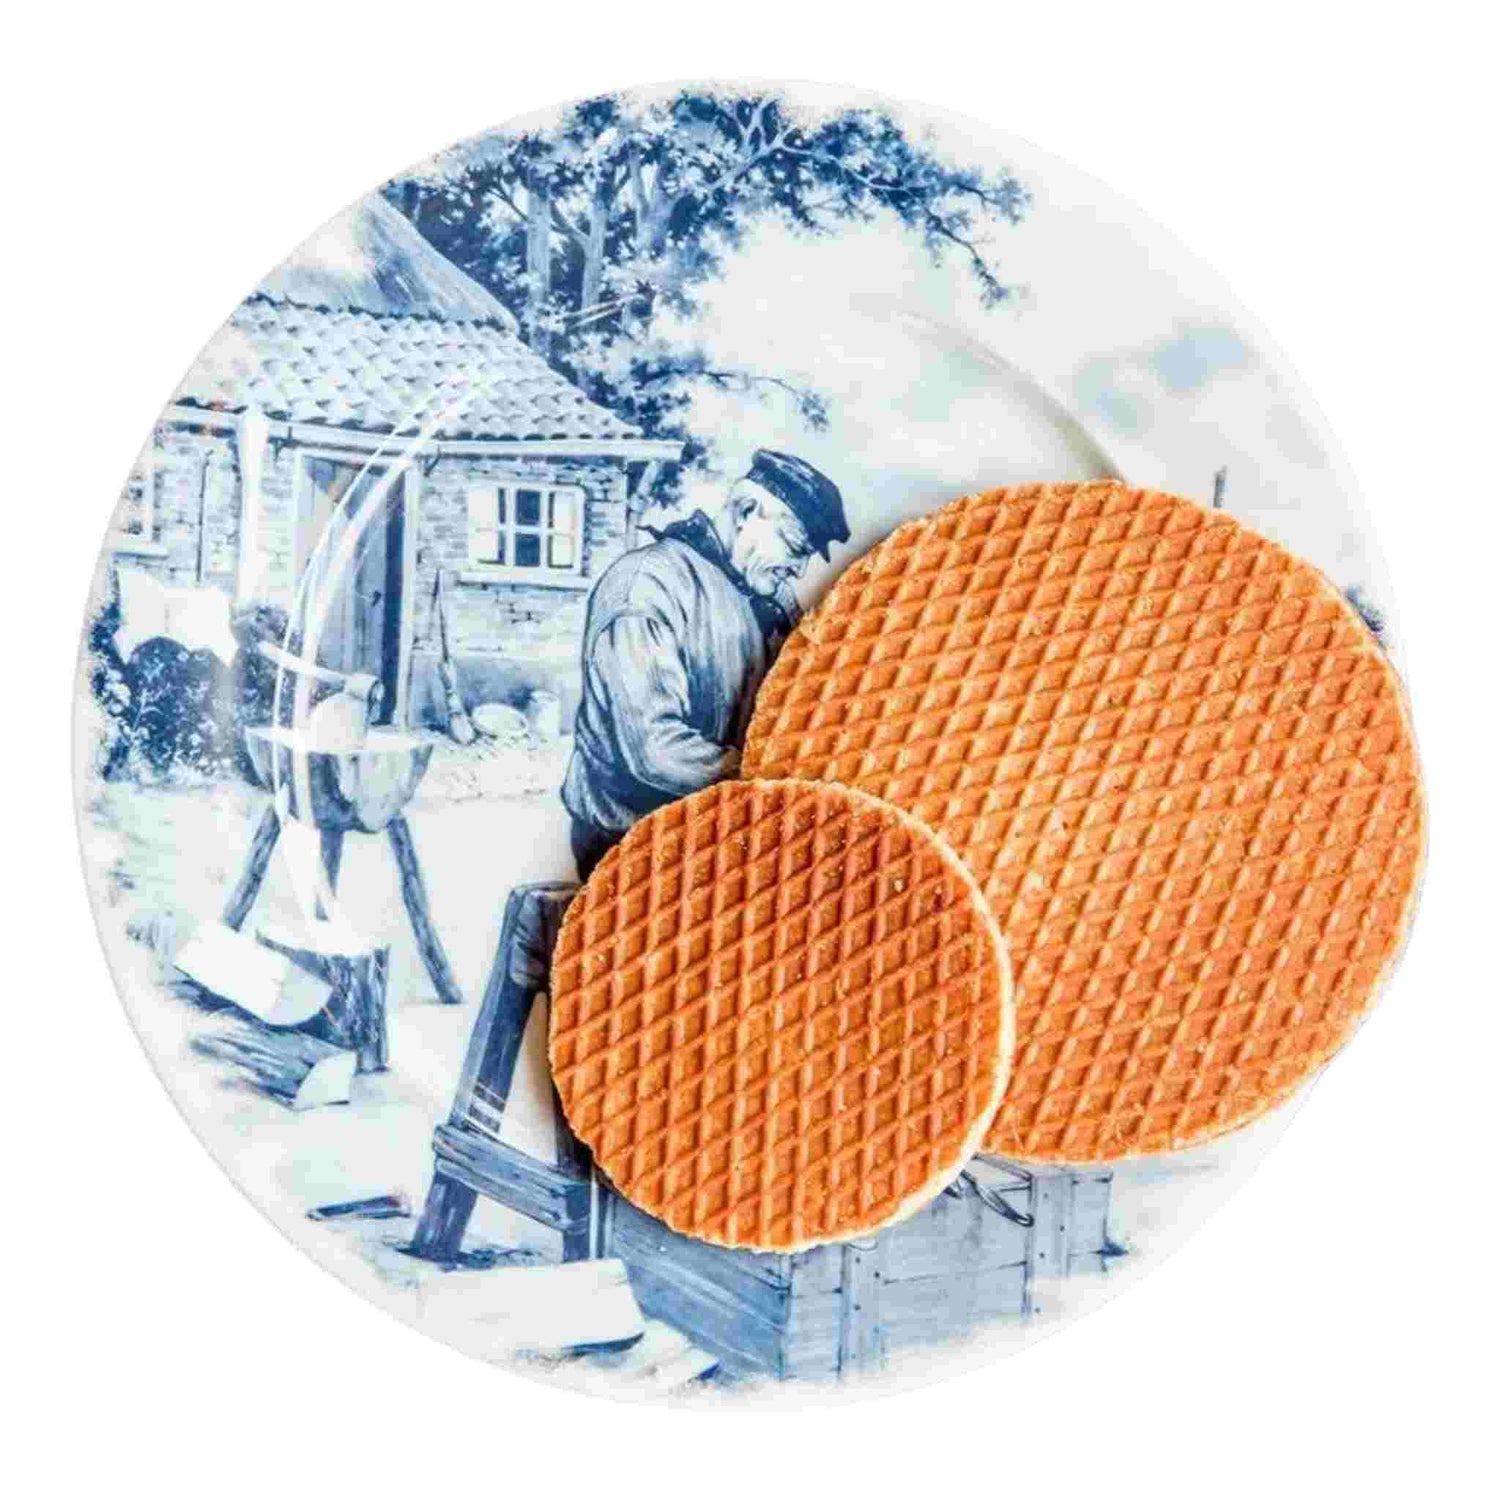 Dutch plate in delft blue style with stroopwafels